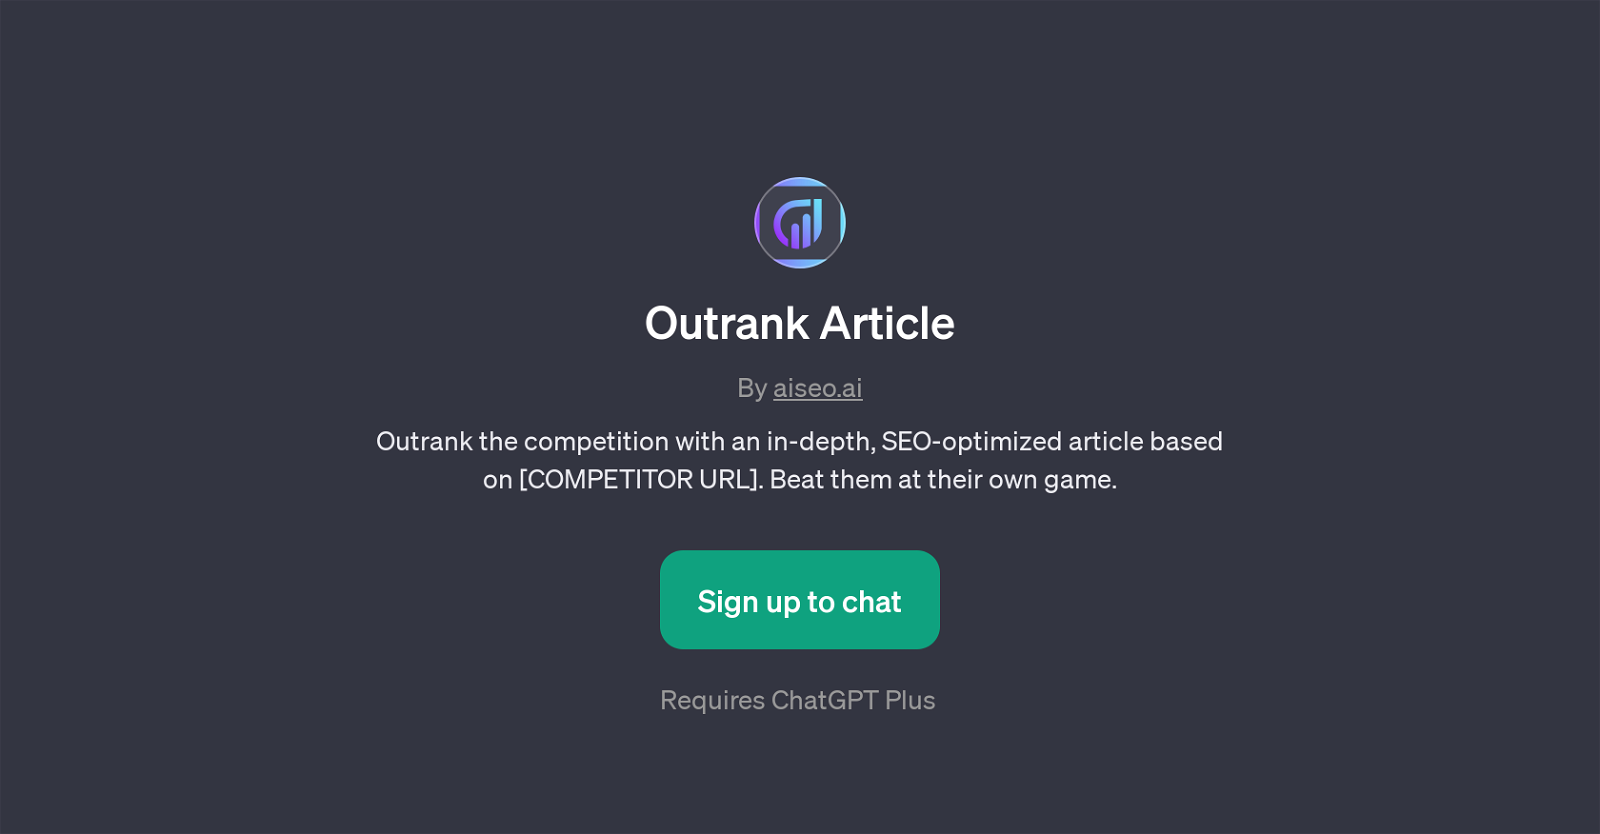 Outrank Article website